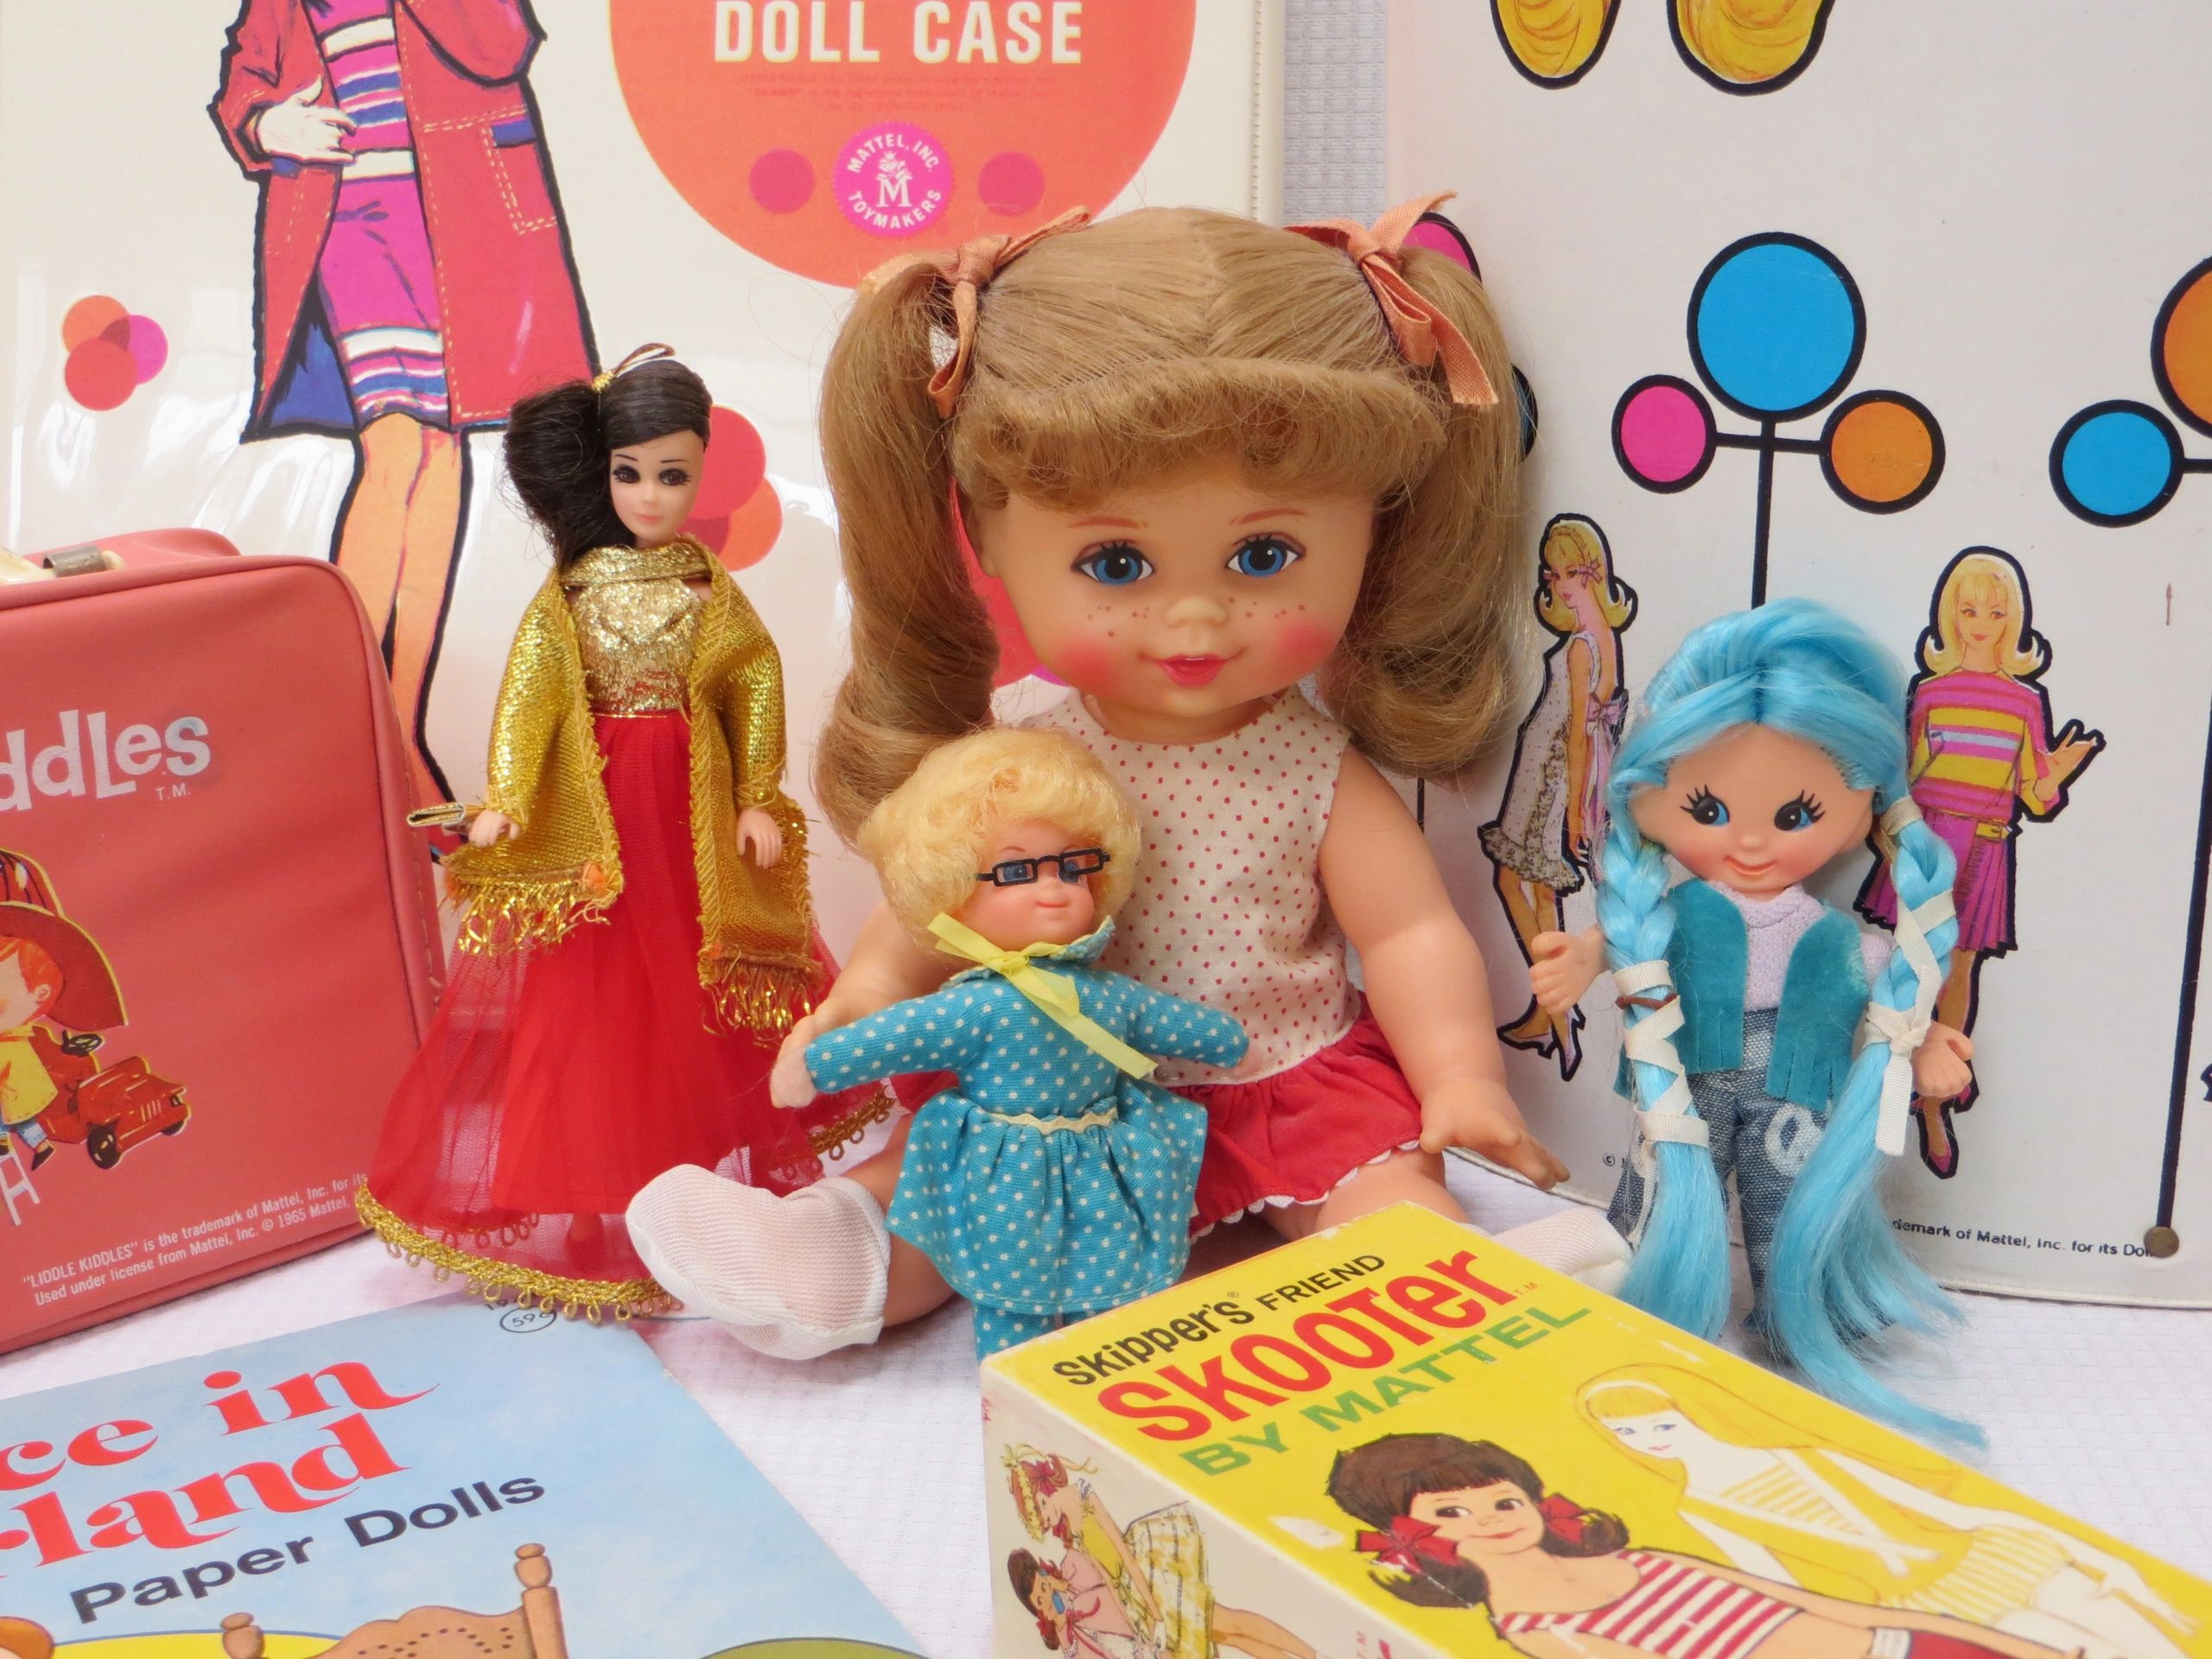 dolls from the 1960s and 1970s